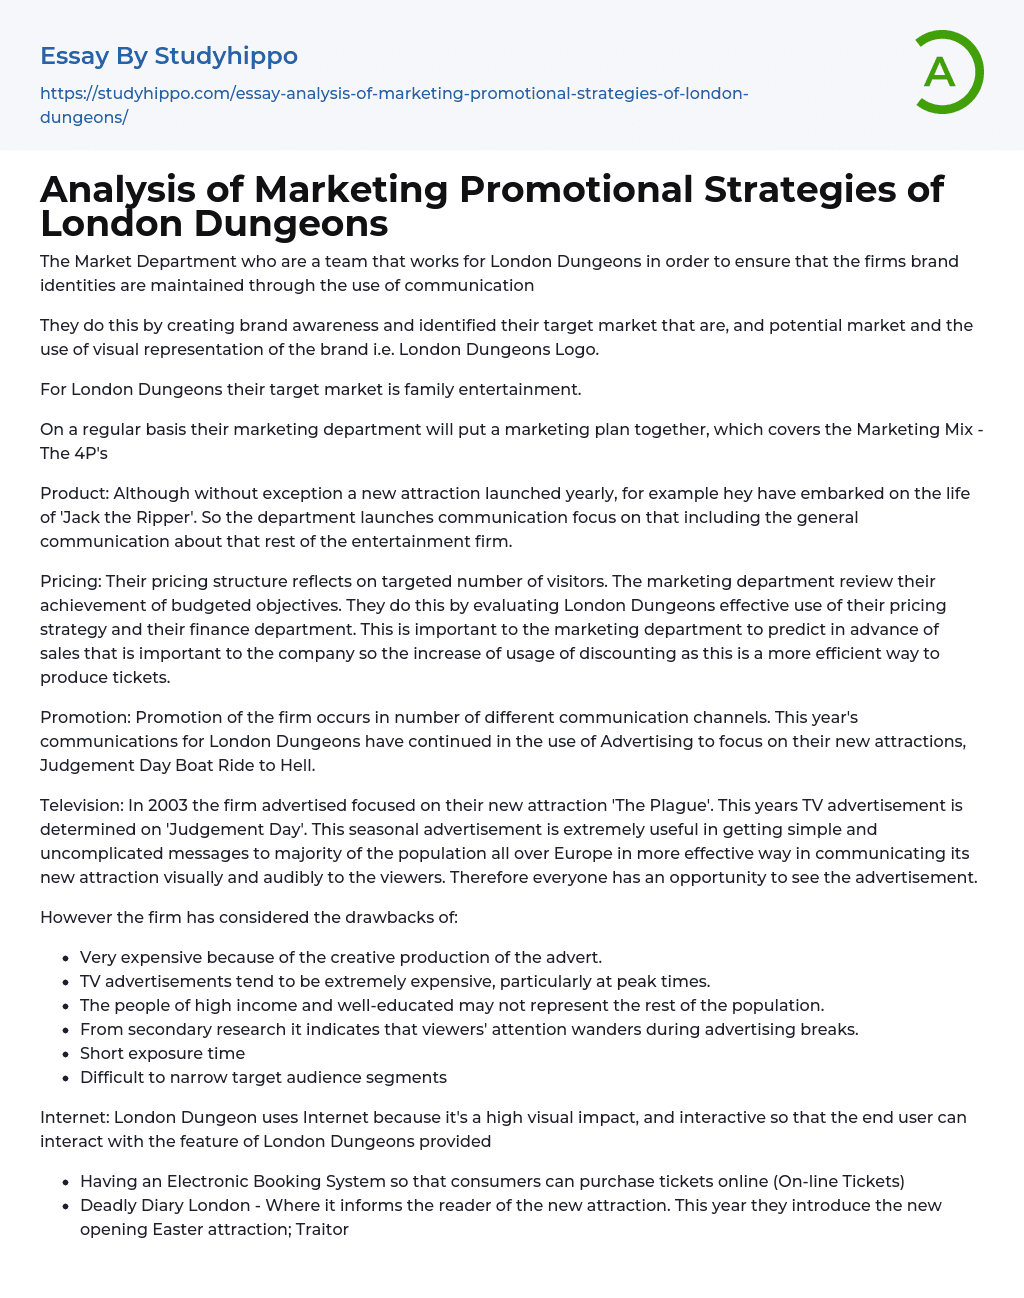 Analysis of Marketing Promotional Strategies of London Dungeons Essay Example